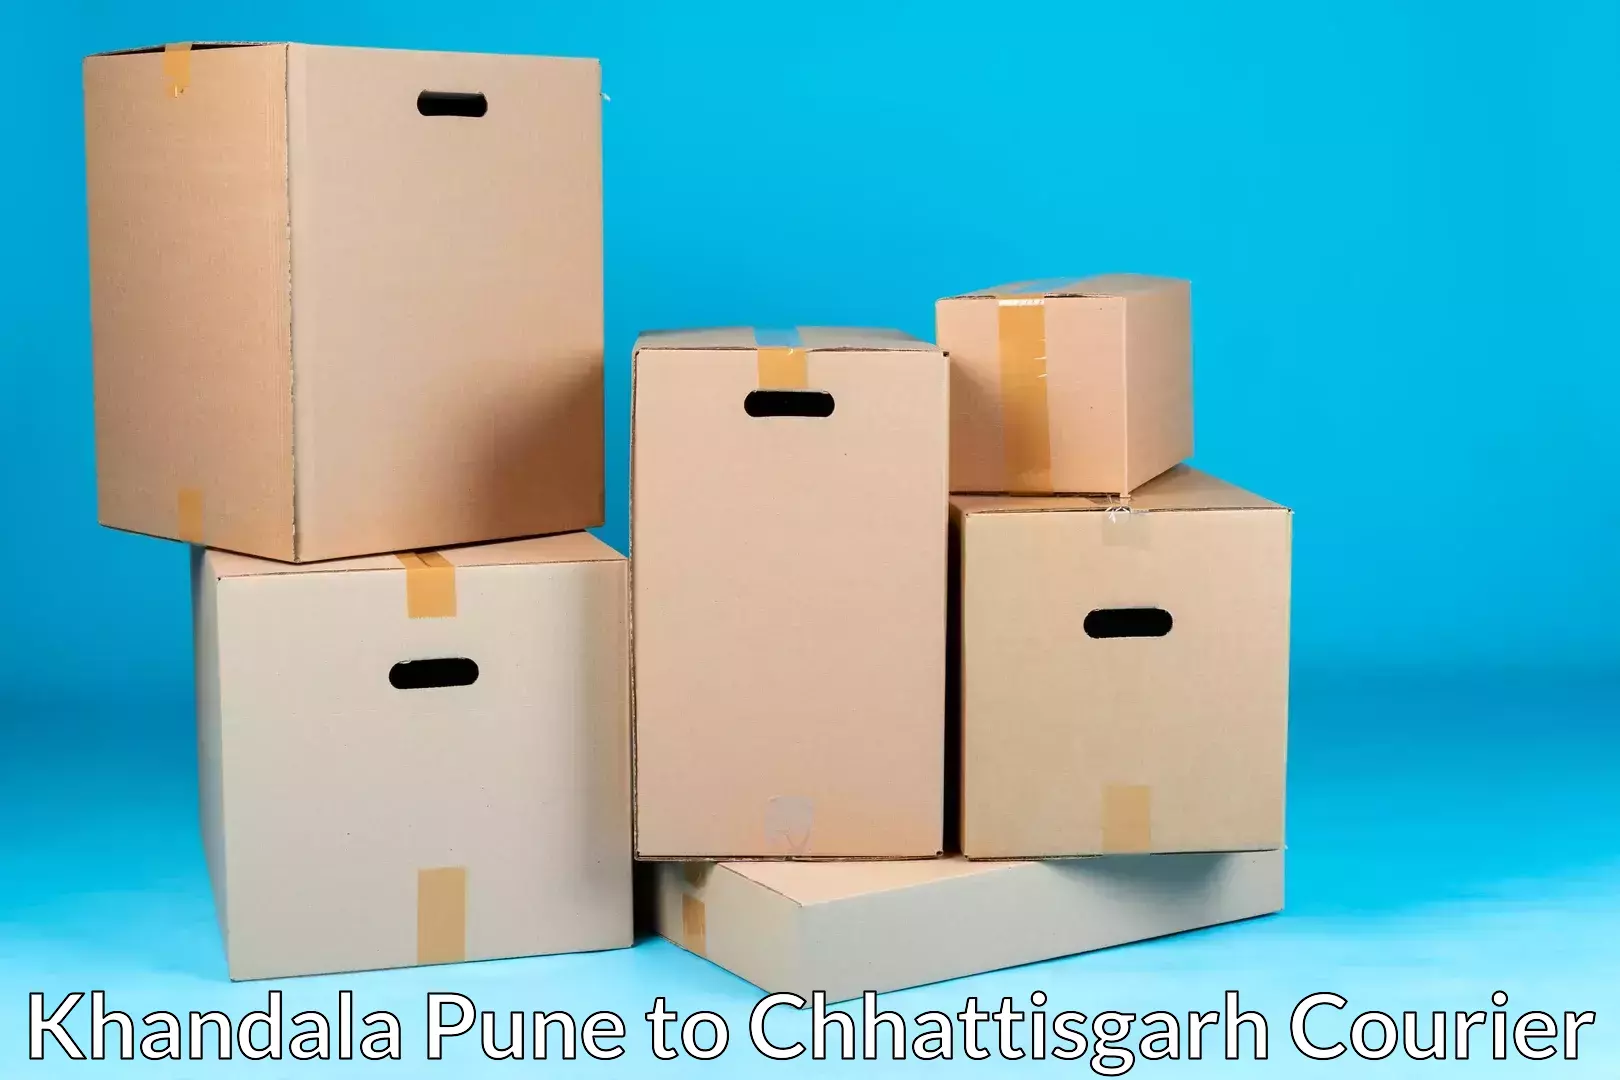 Trusted relocation experts Khandala Pune to bagbahra